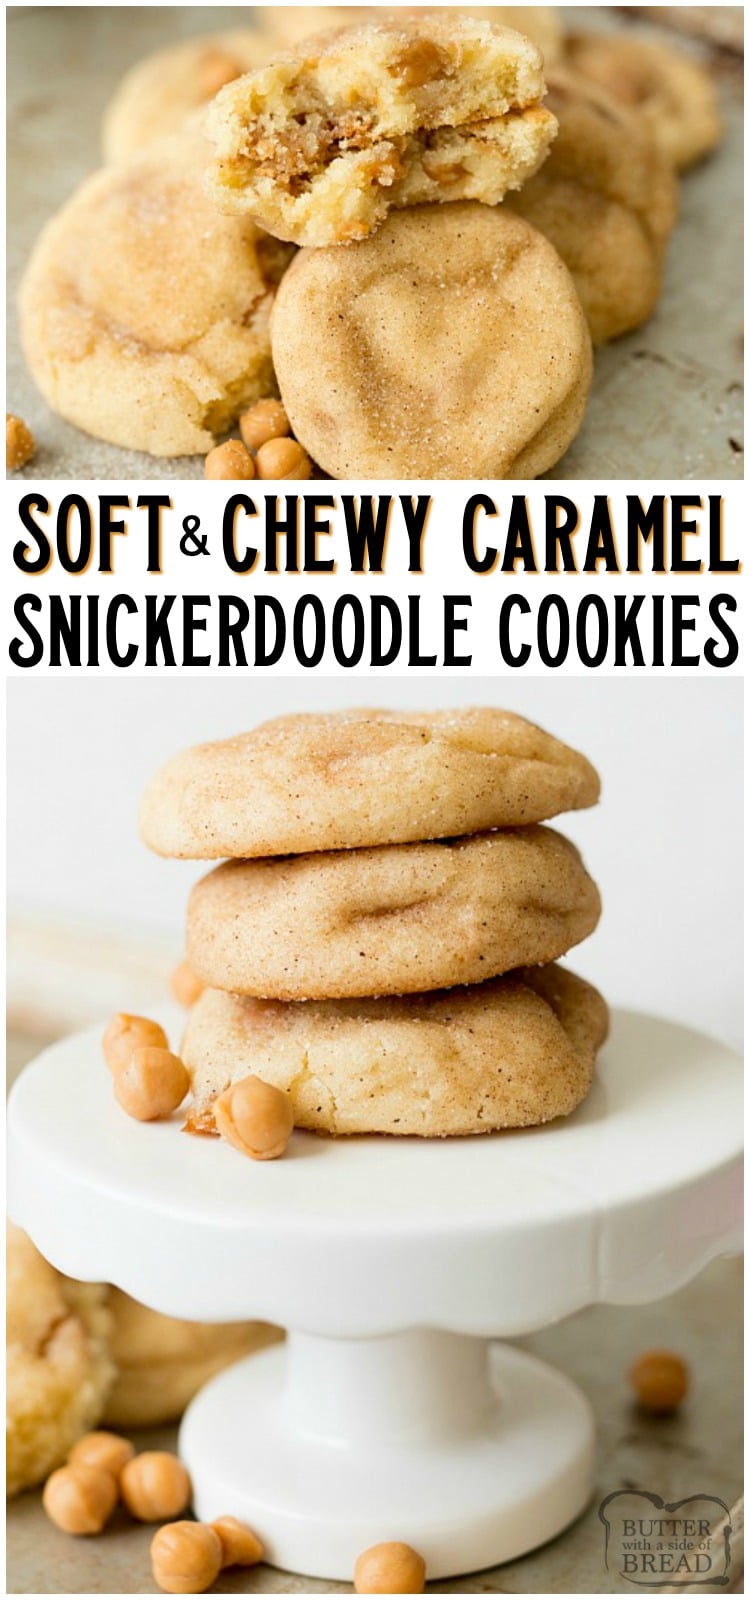 Caramel Snickerdoodle Cookie recipe is a variation on the classic snickerdoodle cookies. Pillowy soft cinnamon and sugar cookie with chunks of caramel inside! These cookies are the best snickerdoodle recipe and they scream AUTUMN! #snickerdoodles #cookies #caramel #cinnamon #snickerdoodle #baking #cookie #recipe from BUTTER WITH A SIDE OF BREAD